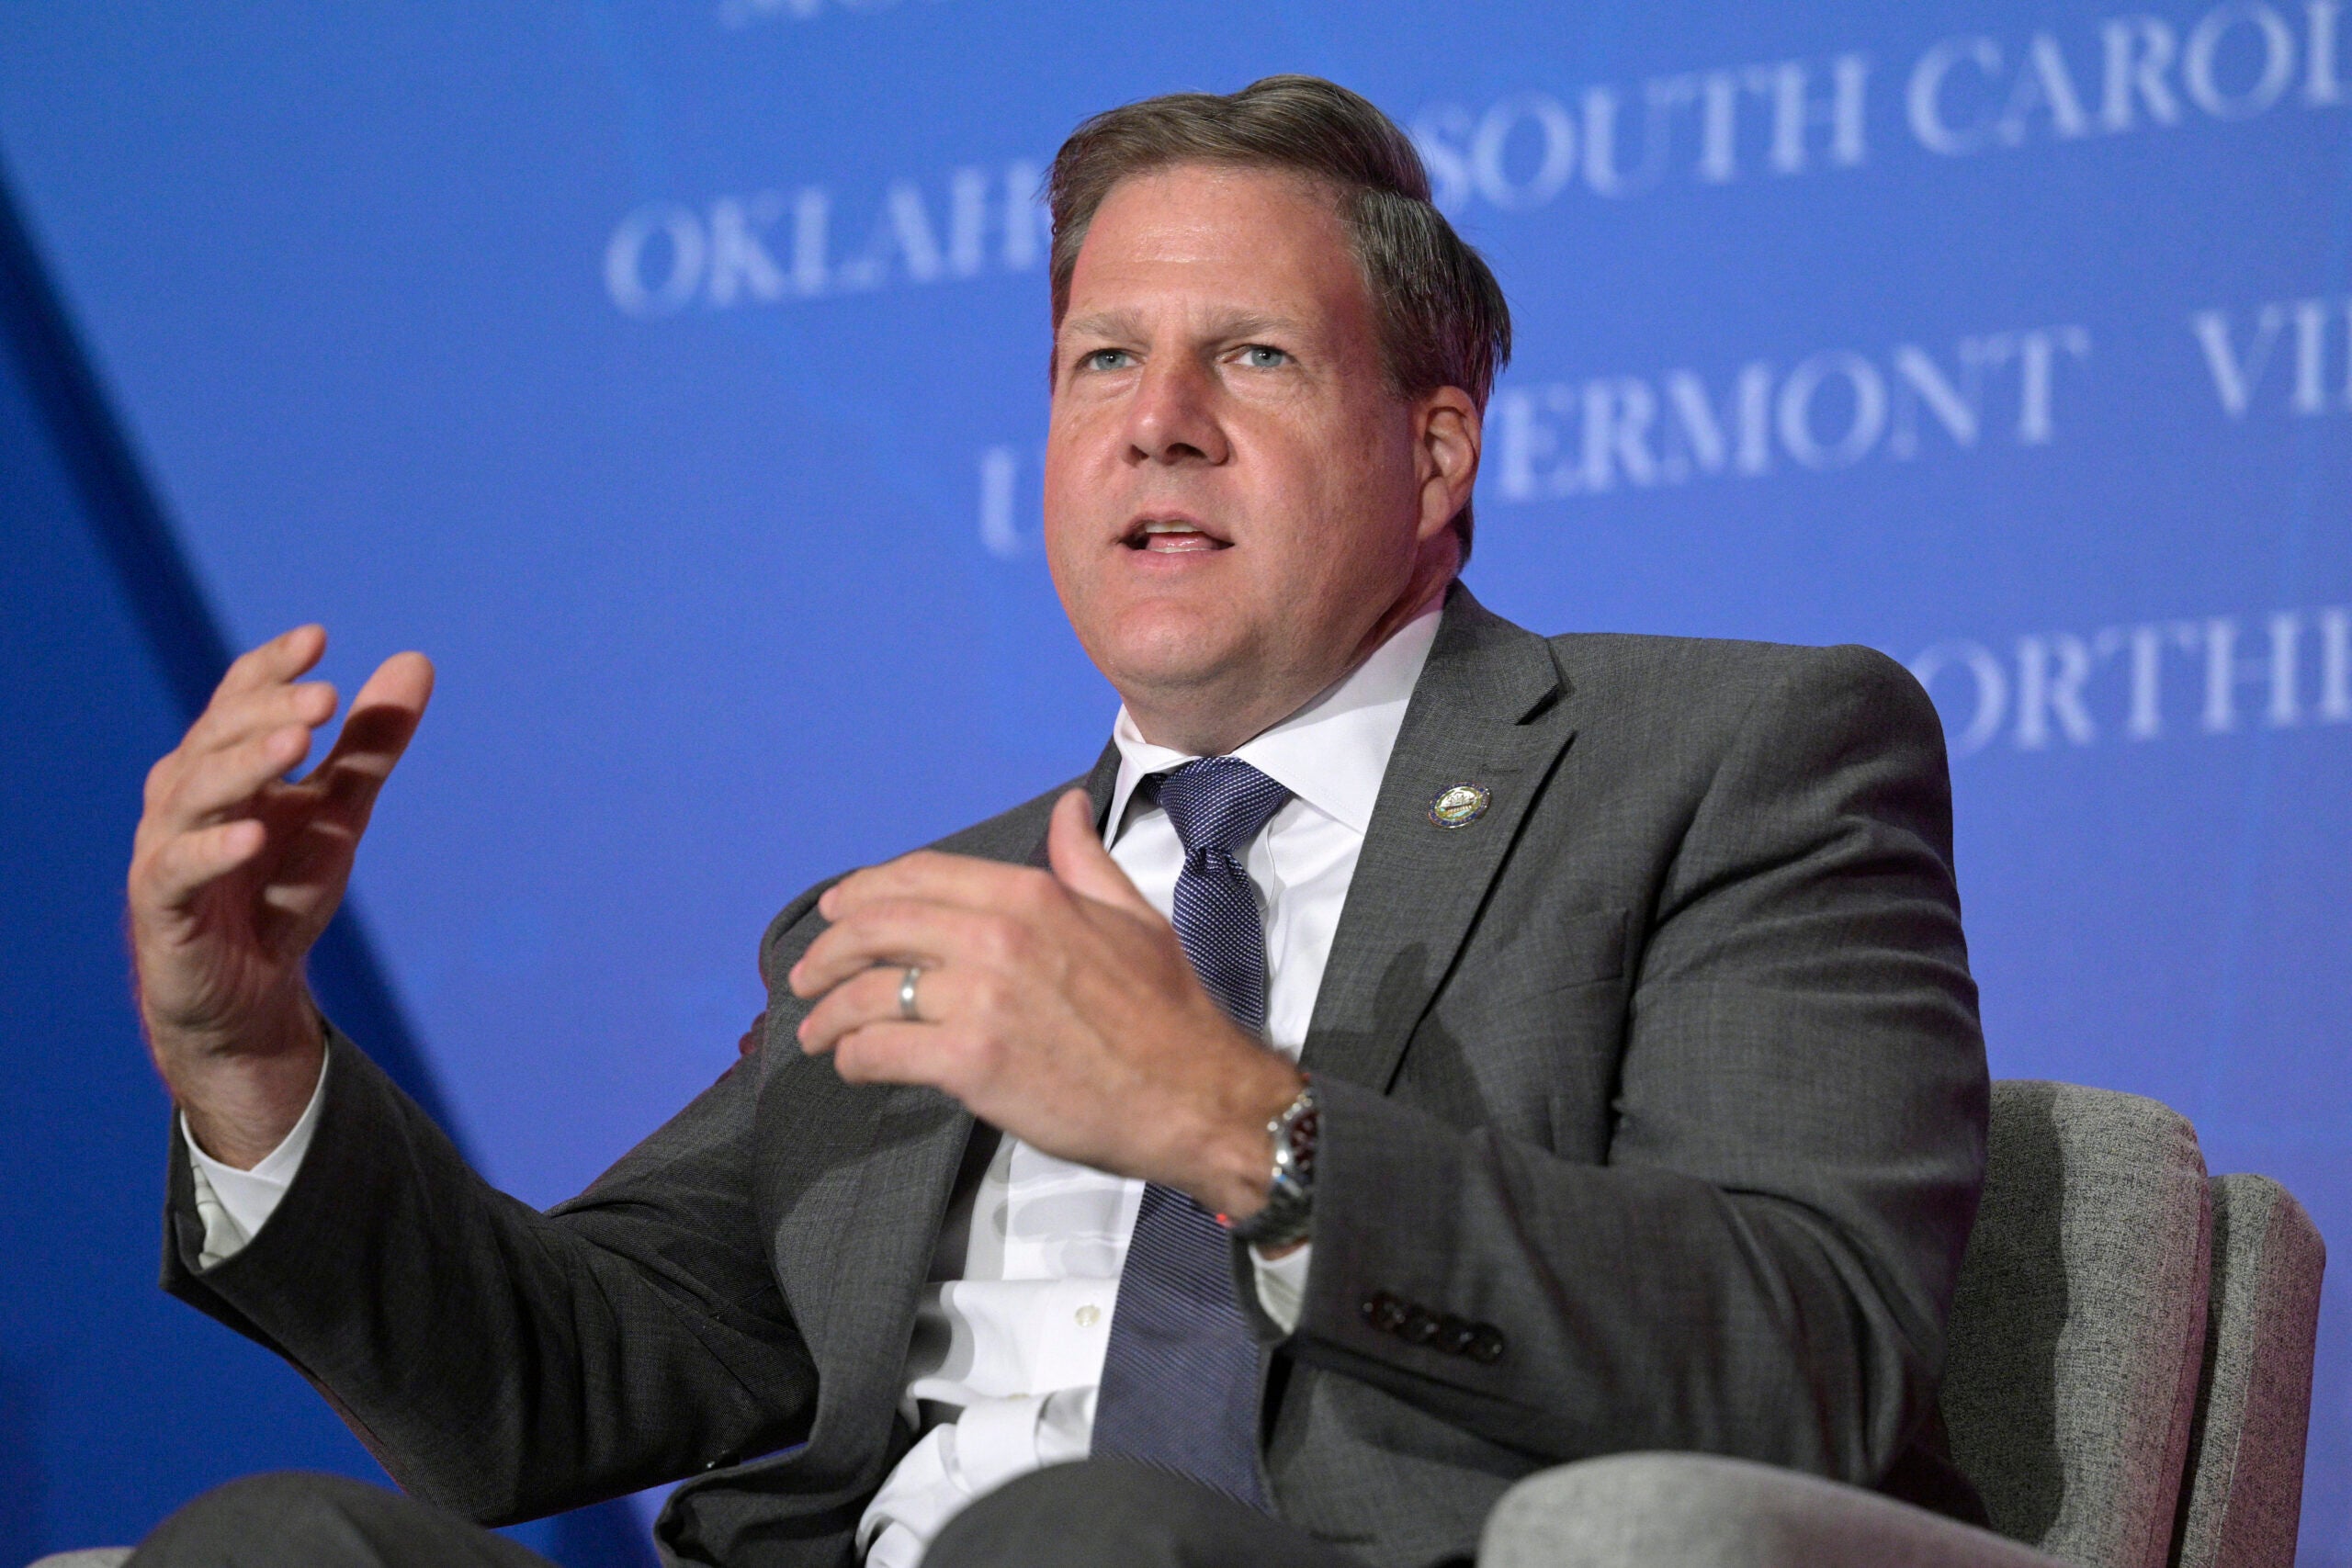 New Hampshire Gov. Chris Sununu takes part in a panel discussion during a Republican Governors Association conference.